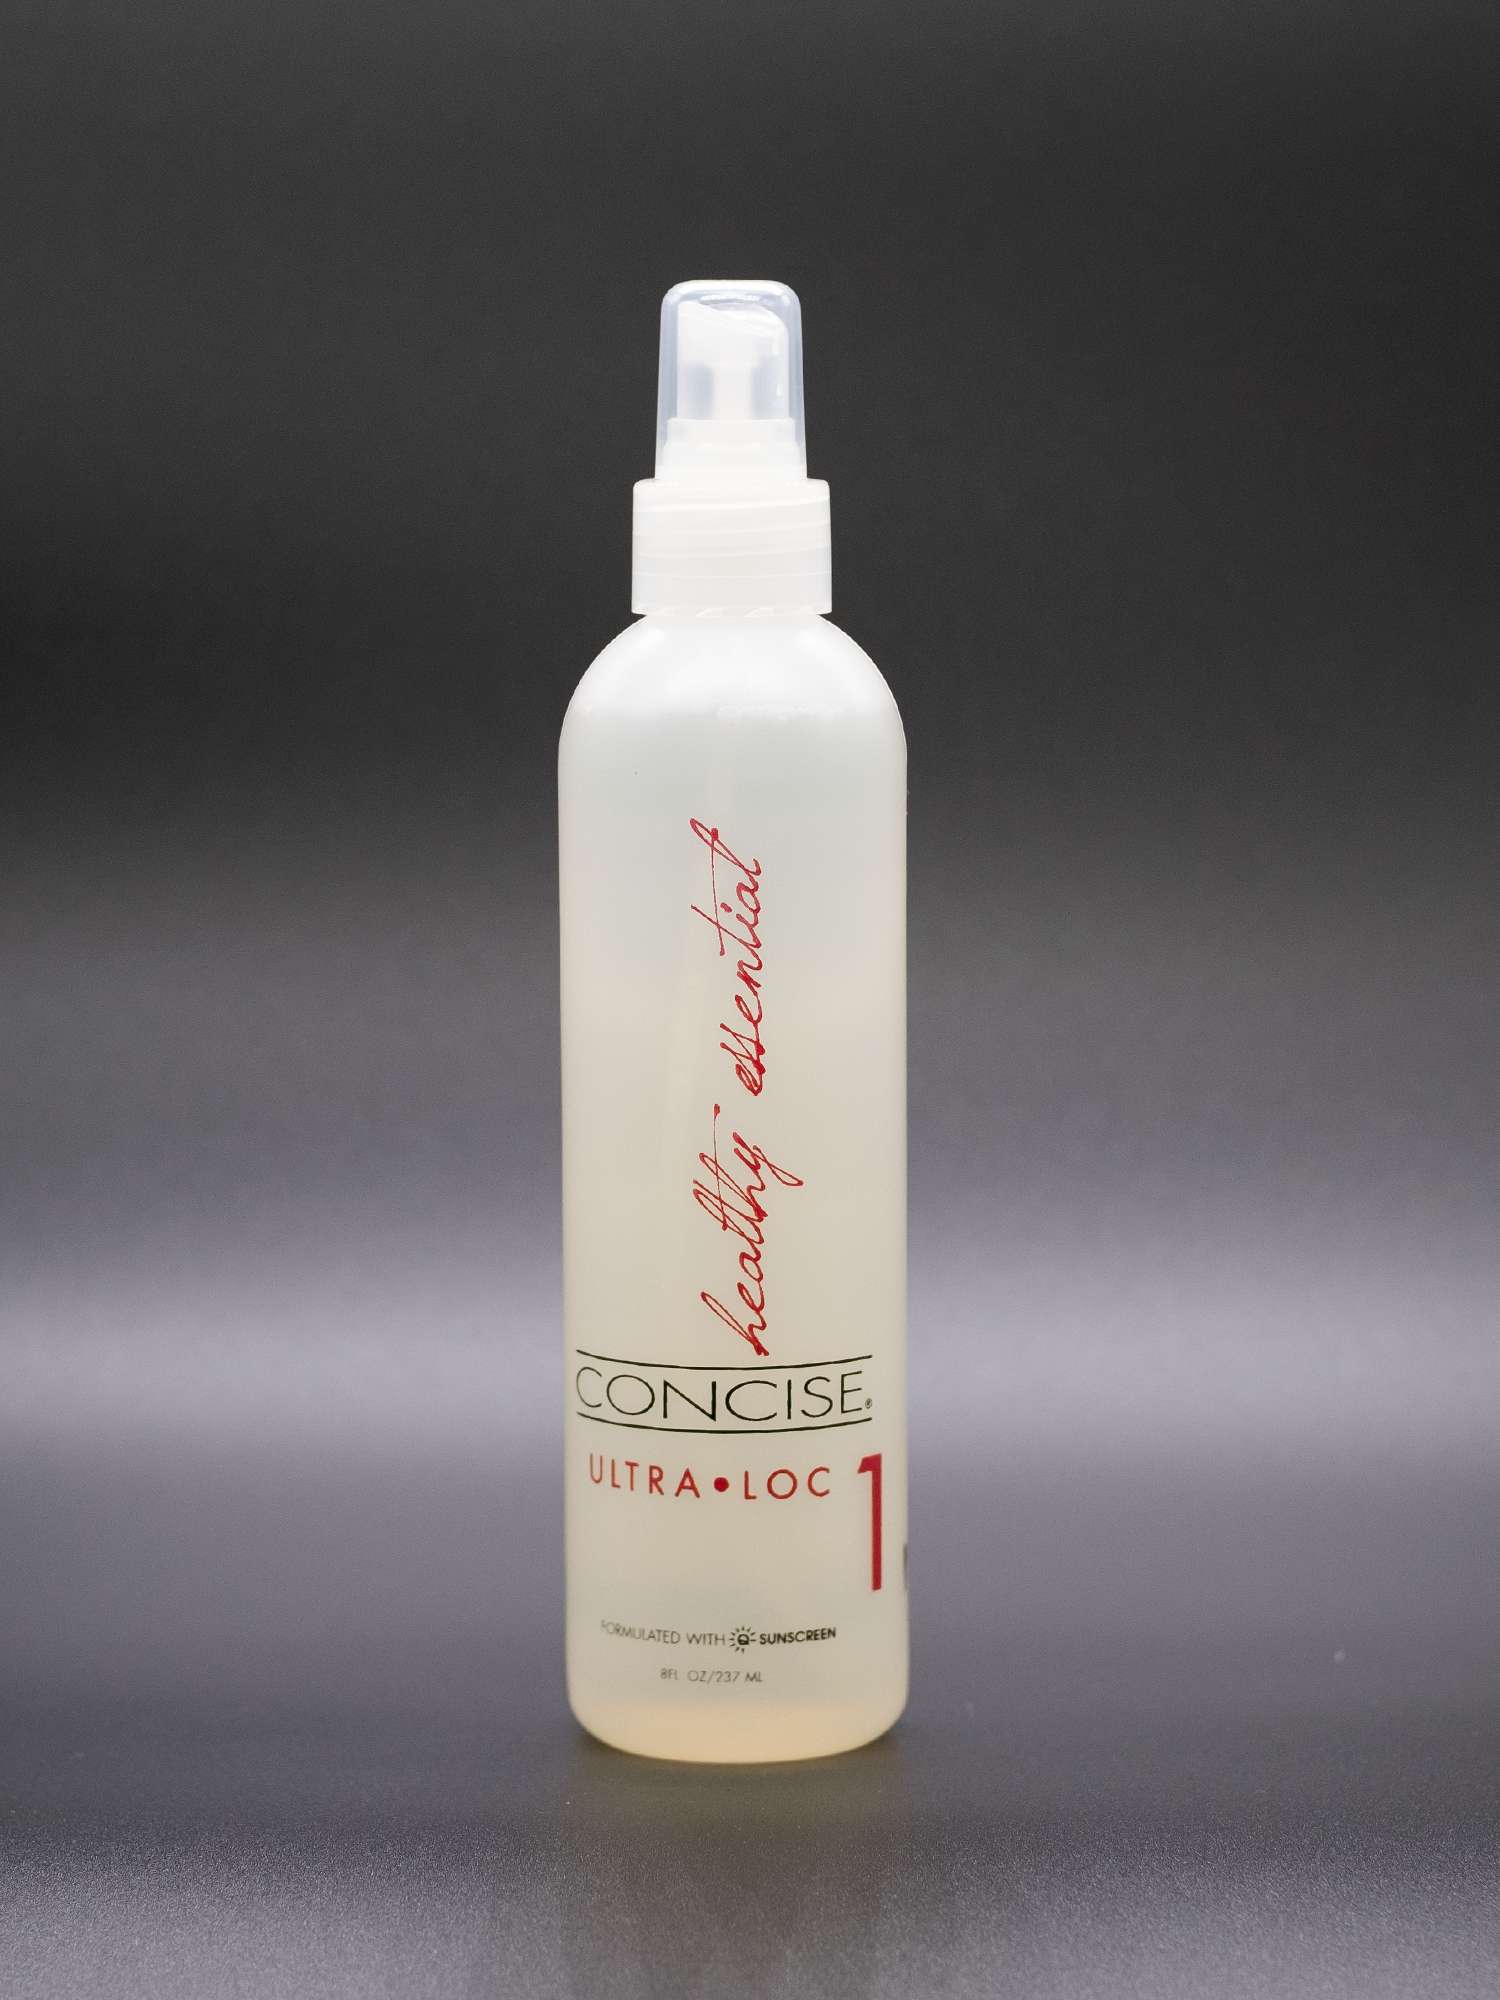 This spray replenishes moisture to dry hair, it also has a sunscreen to help protect from the damaging effect of UV rays. Comes in 8 Oz. bottles.